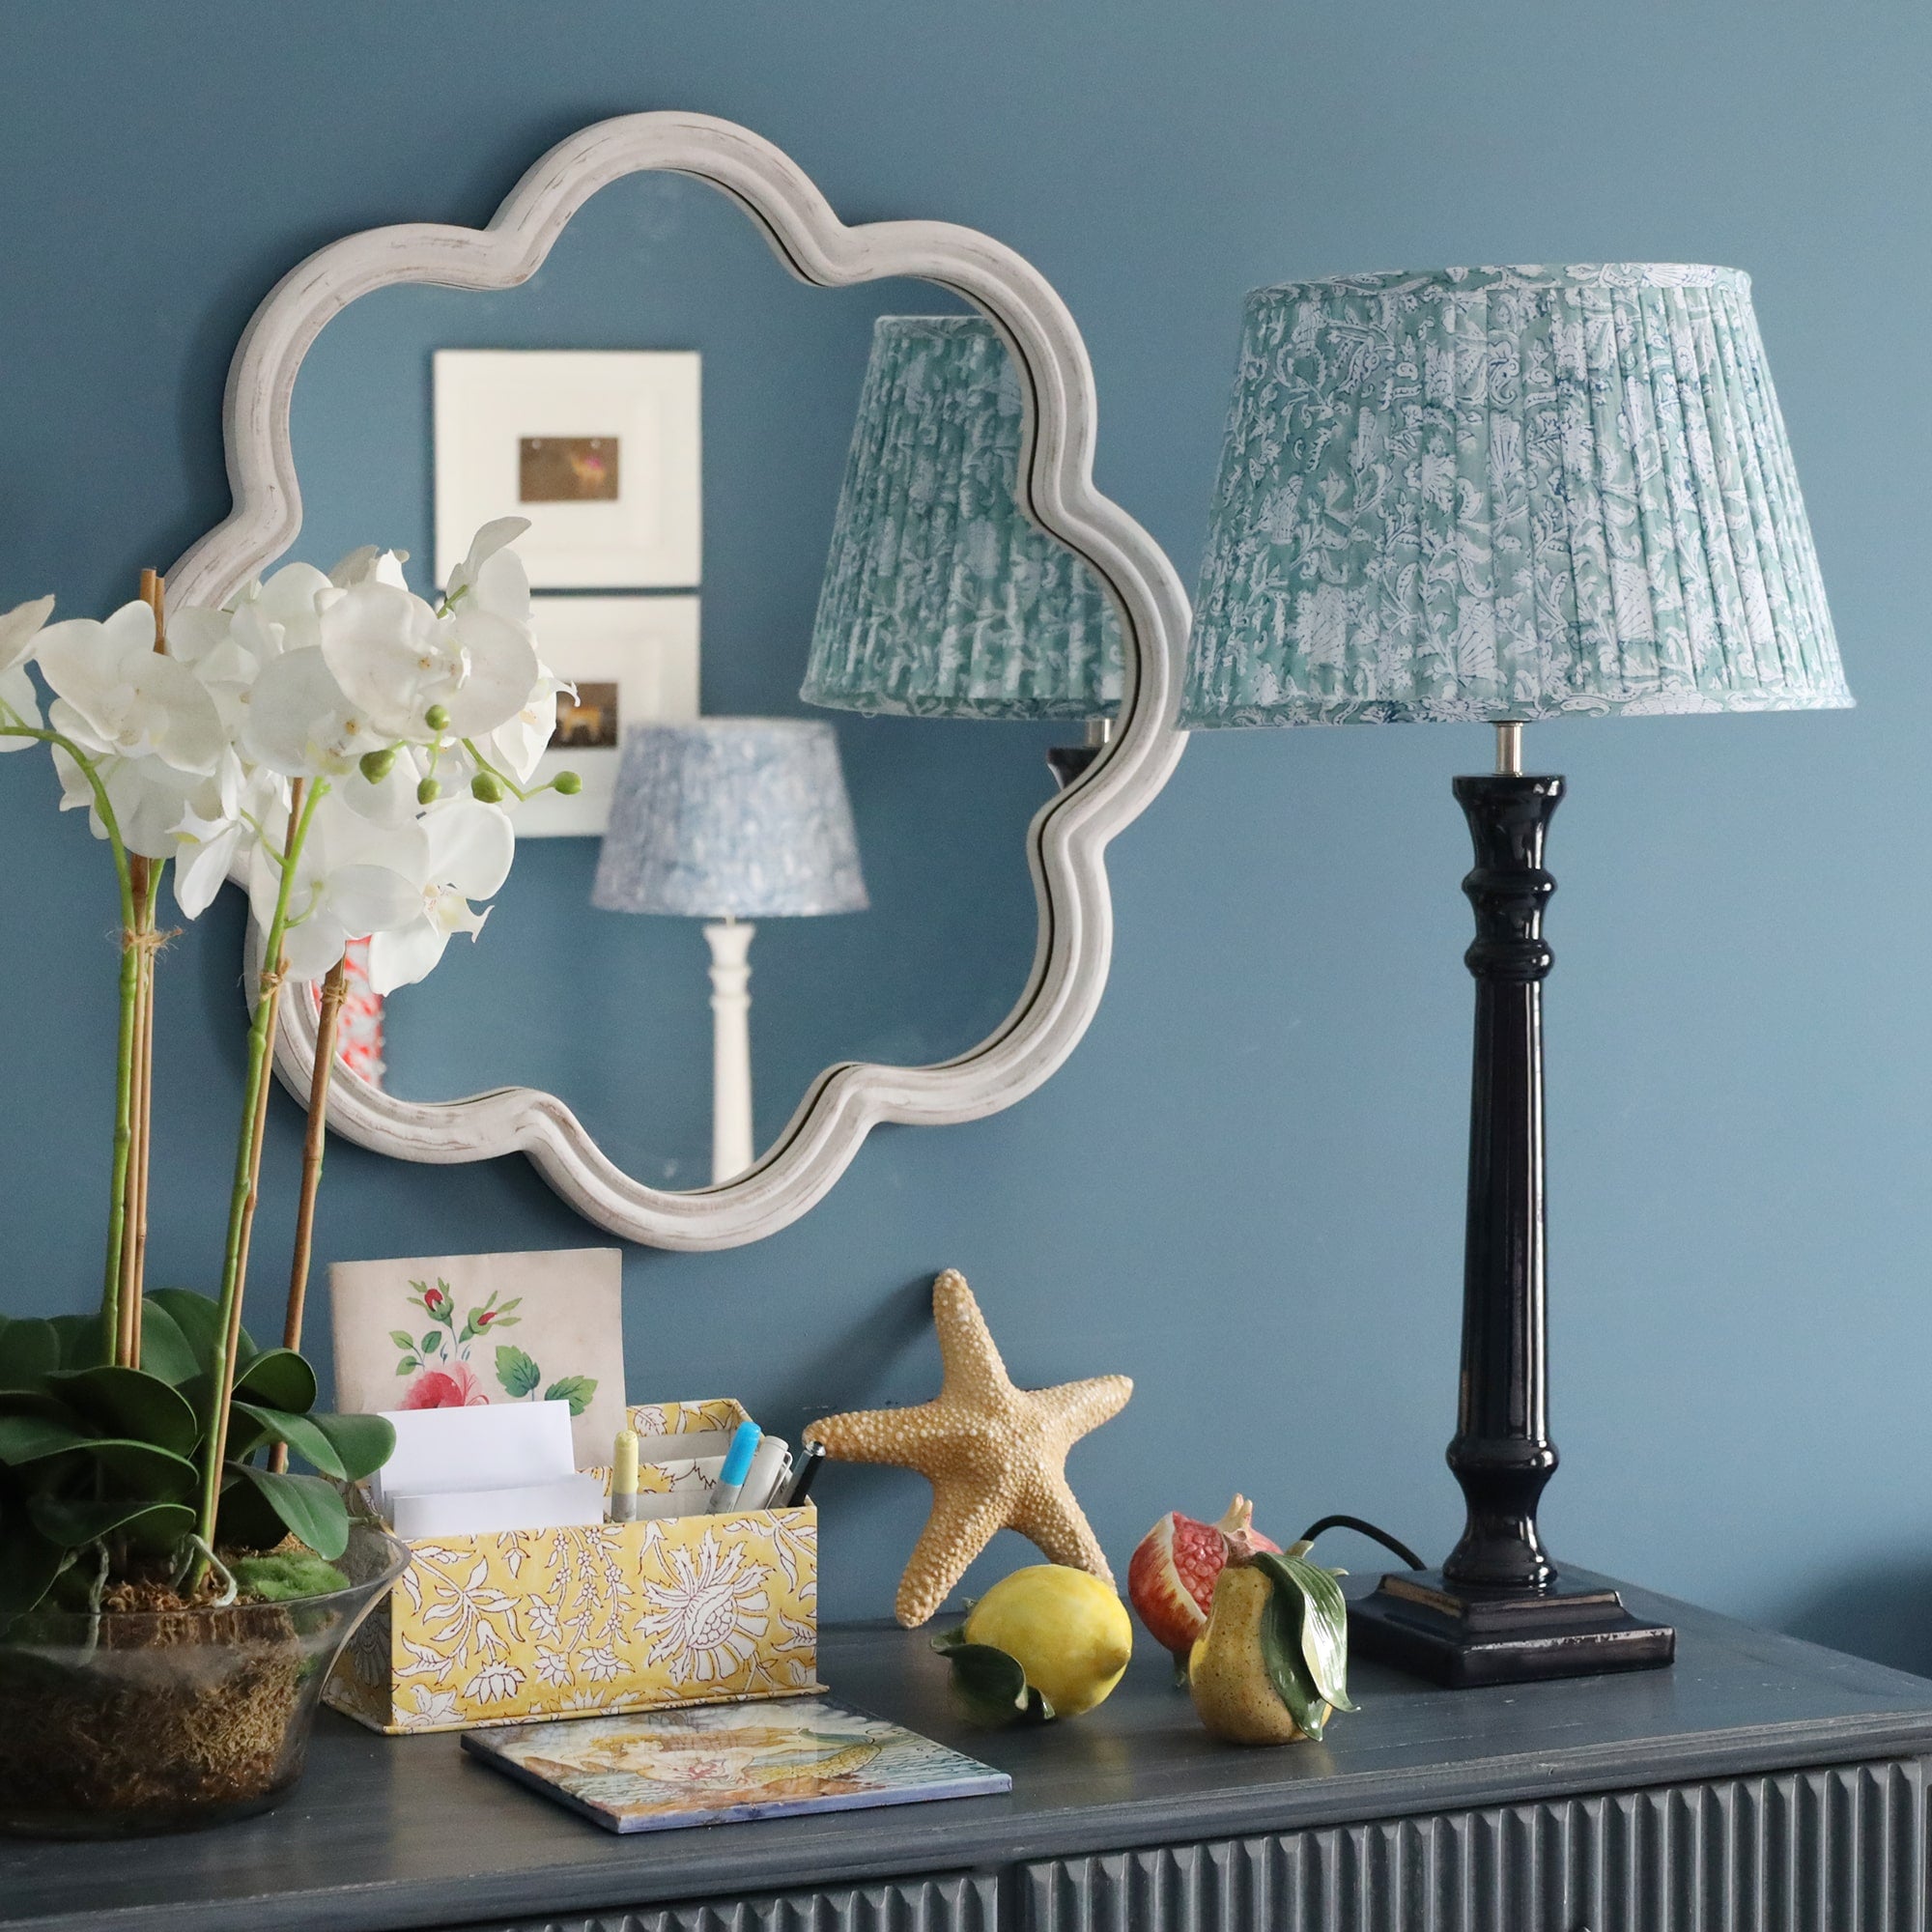 Navy Lacquer Godophin lampbase with a pleated lampshade on a sideboard.On the sideboard are several ceramic fruits,staionary, an orchid in a pot and a starfish.Behind on the wall is a wave mirror 